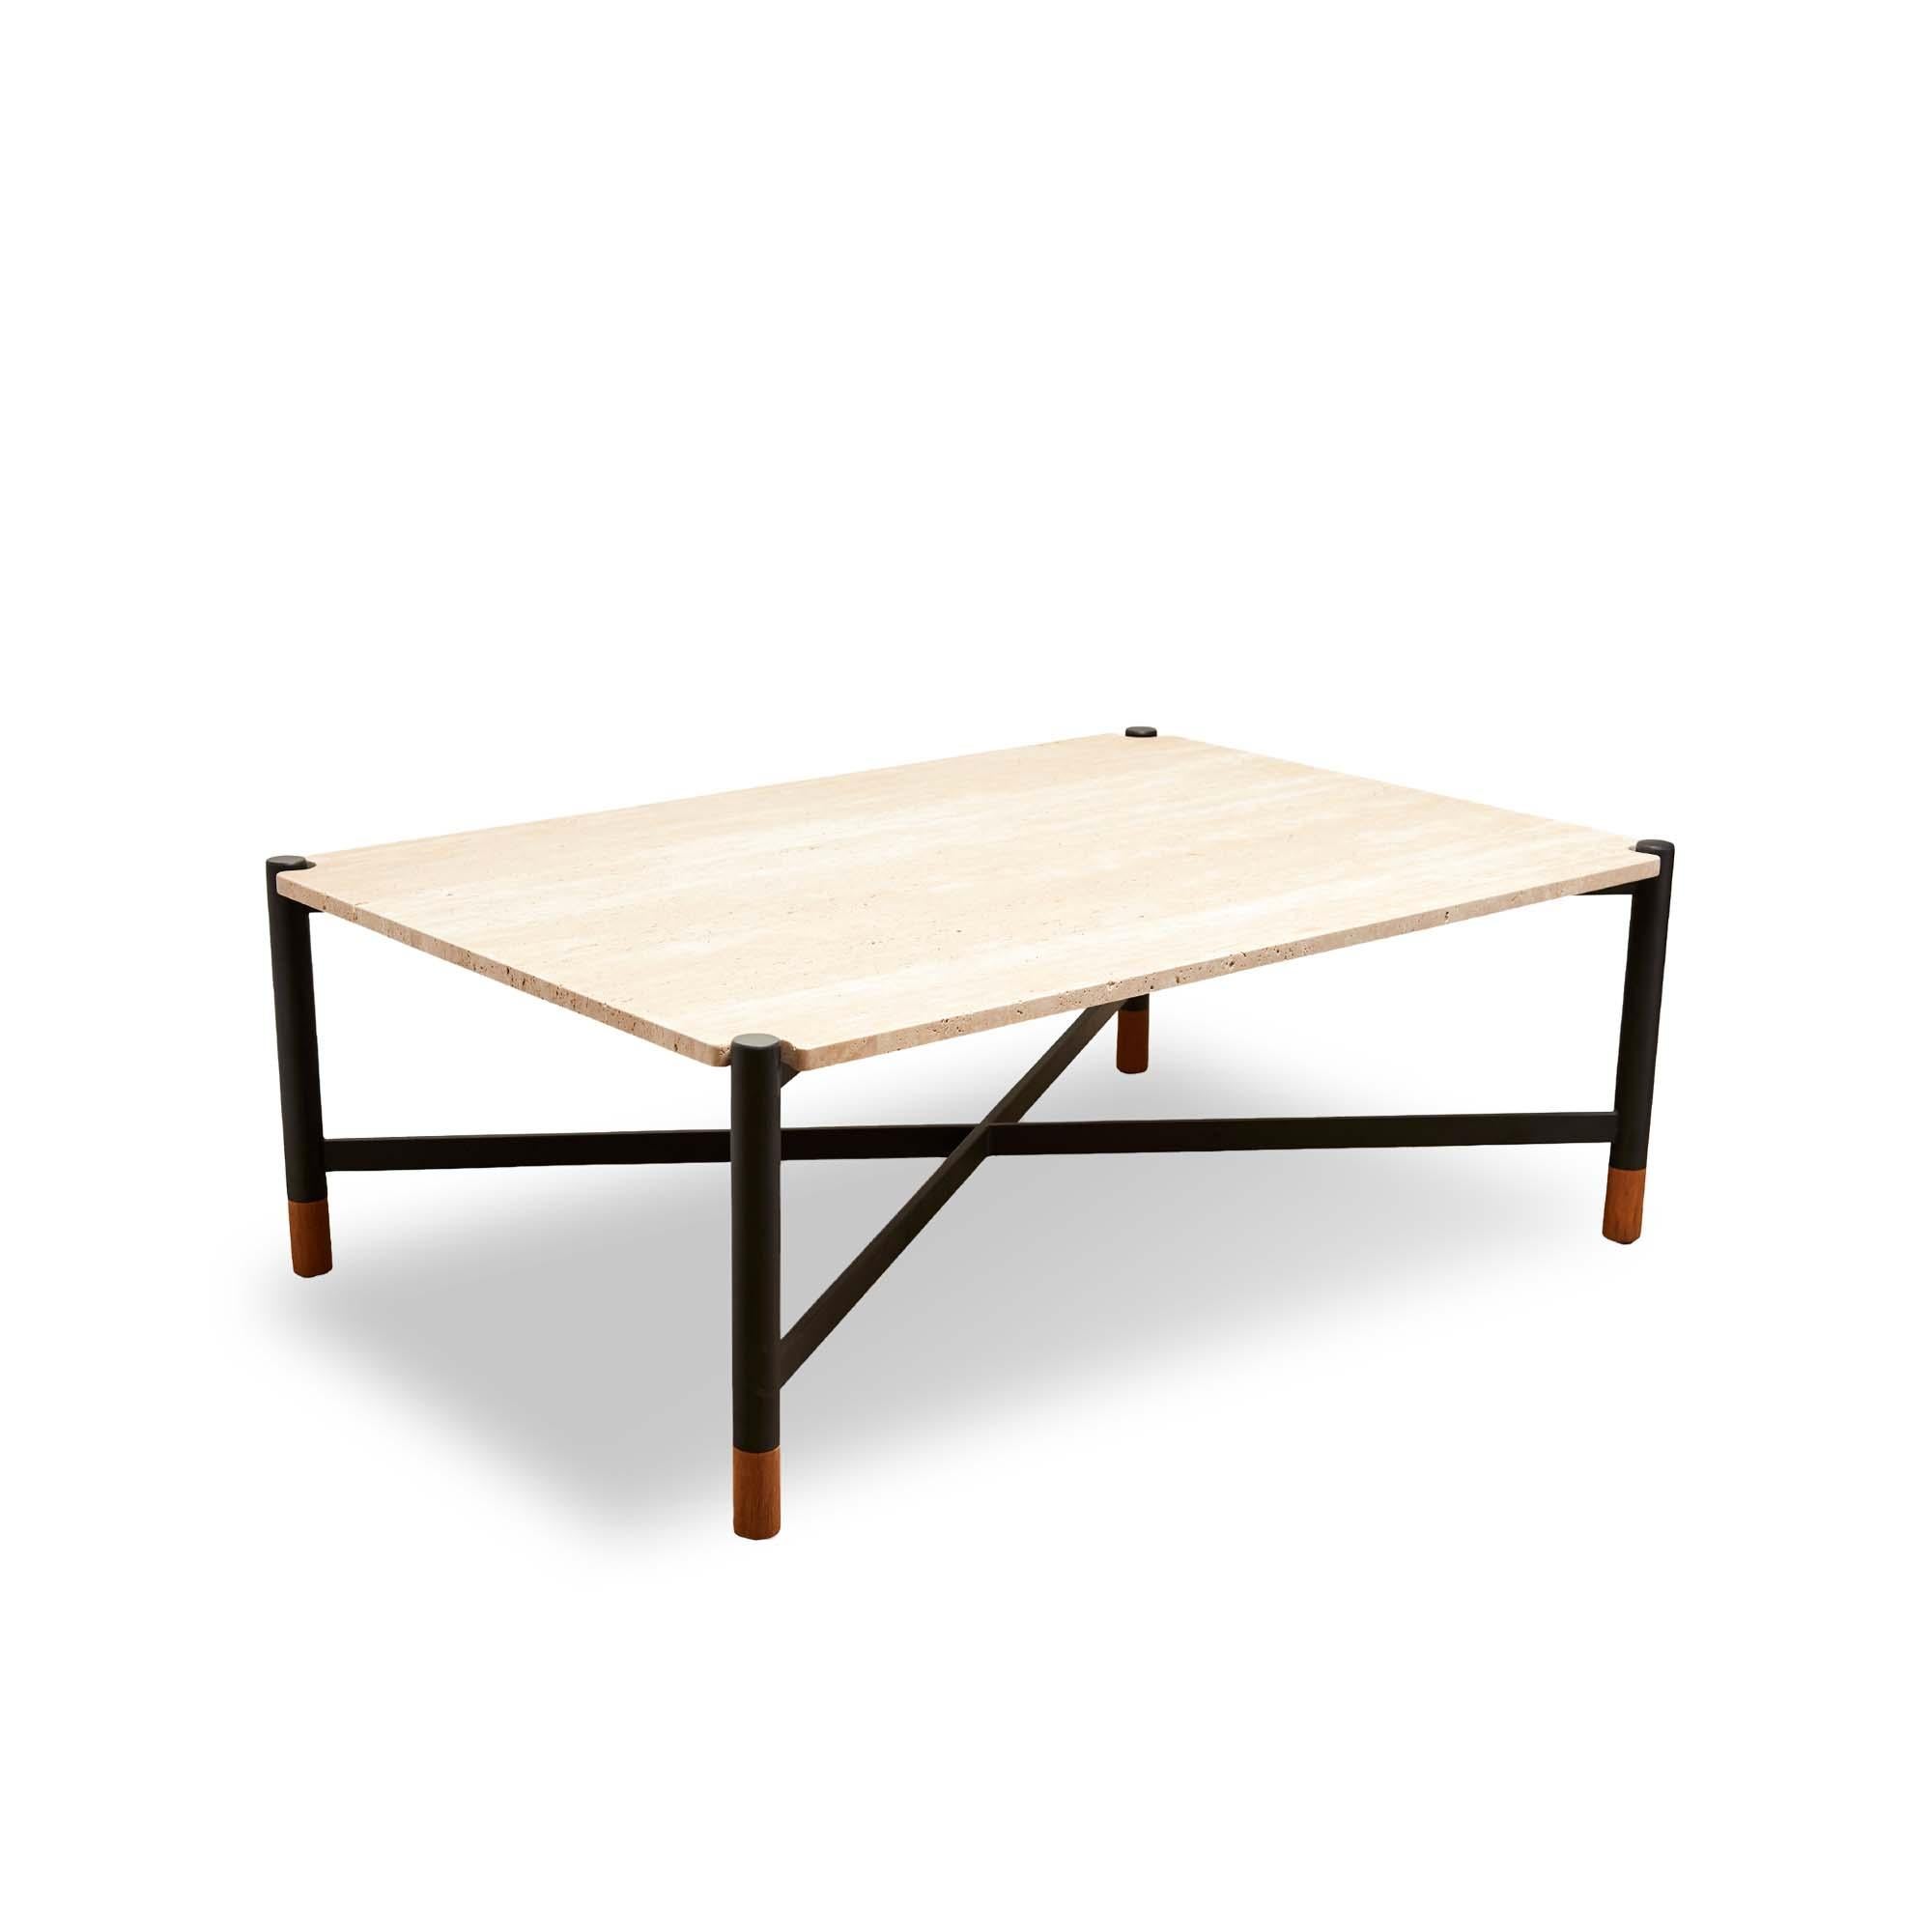 The outdoor Bronson coffee table features a turbo or walnut travertine top with notched corners that rests atop a powder coated steel base with teak feet. Can be used indoors or outdoors.

The Lawson-Fenning Collection is designed and handmade in